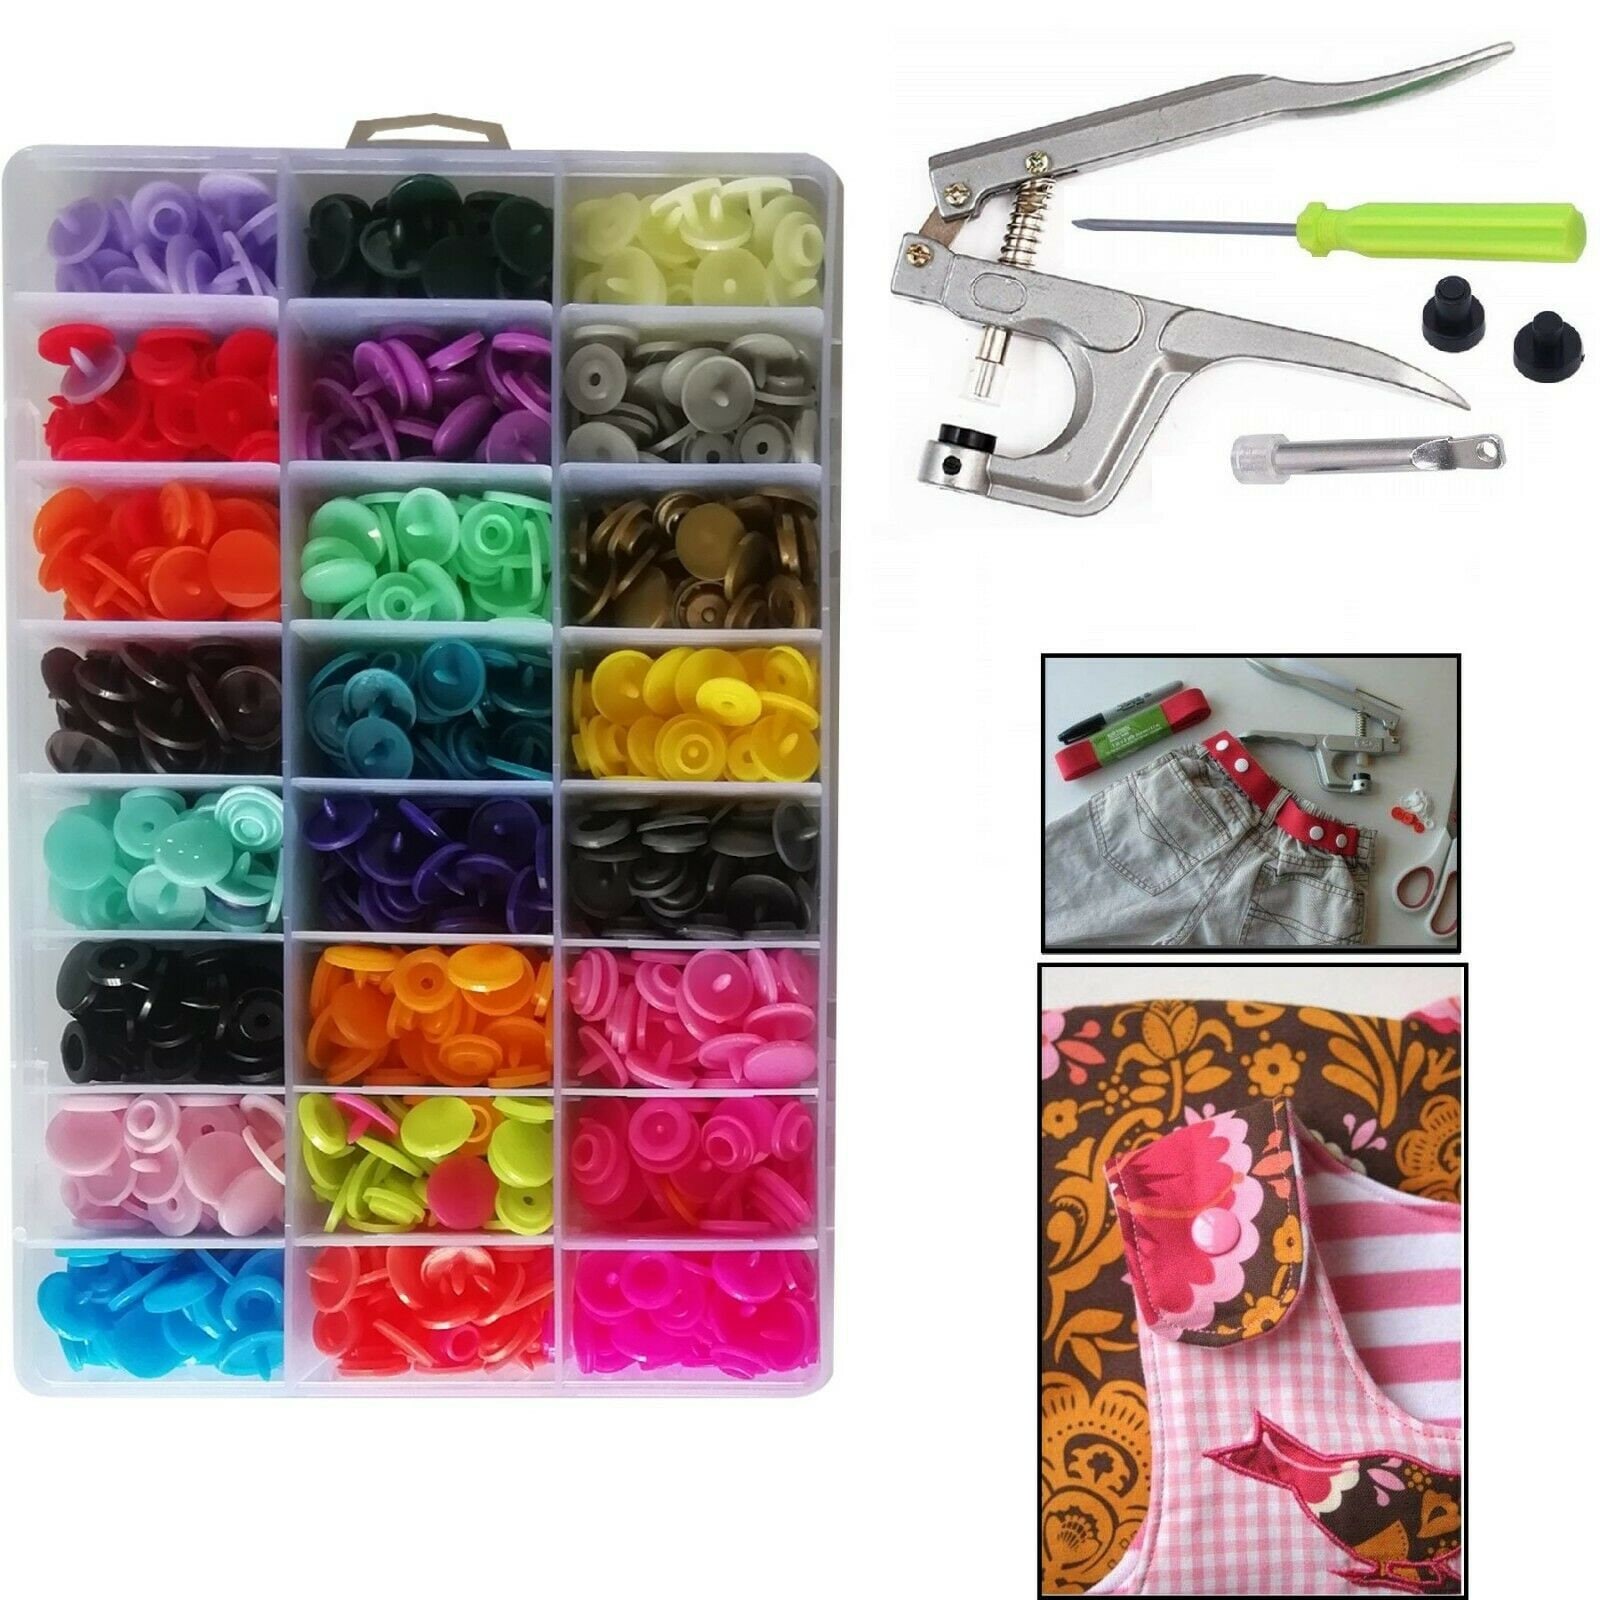  360pcs DIY T5 Snap Plastic Buttons Fasteners Craft 24 Colors  with Snaps Pliers and Organizer Storage Containers